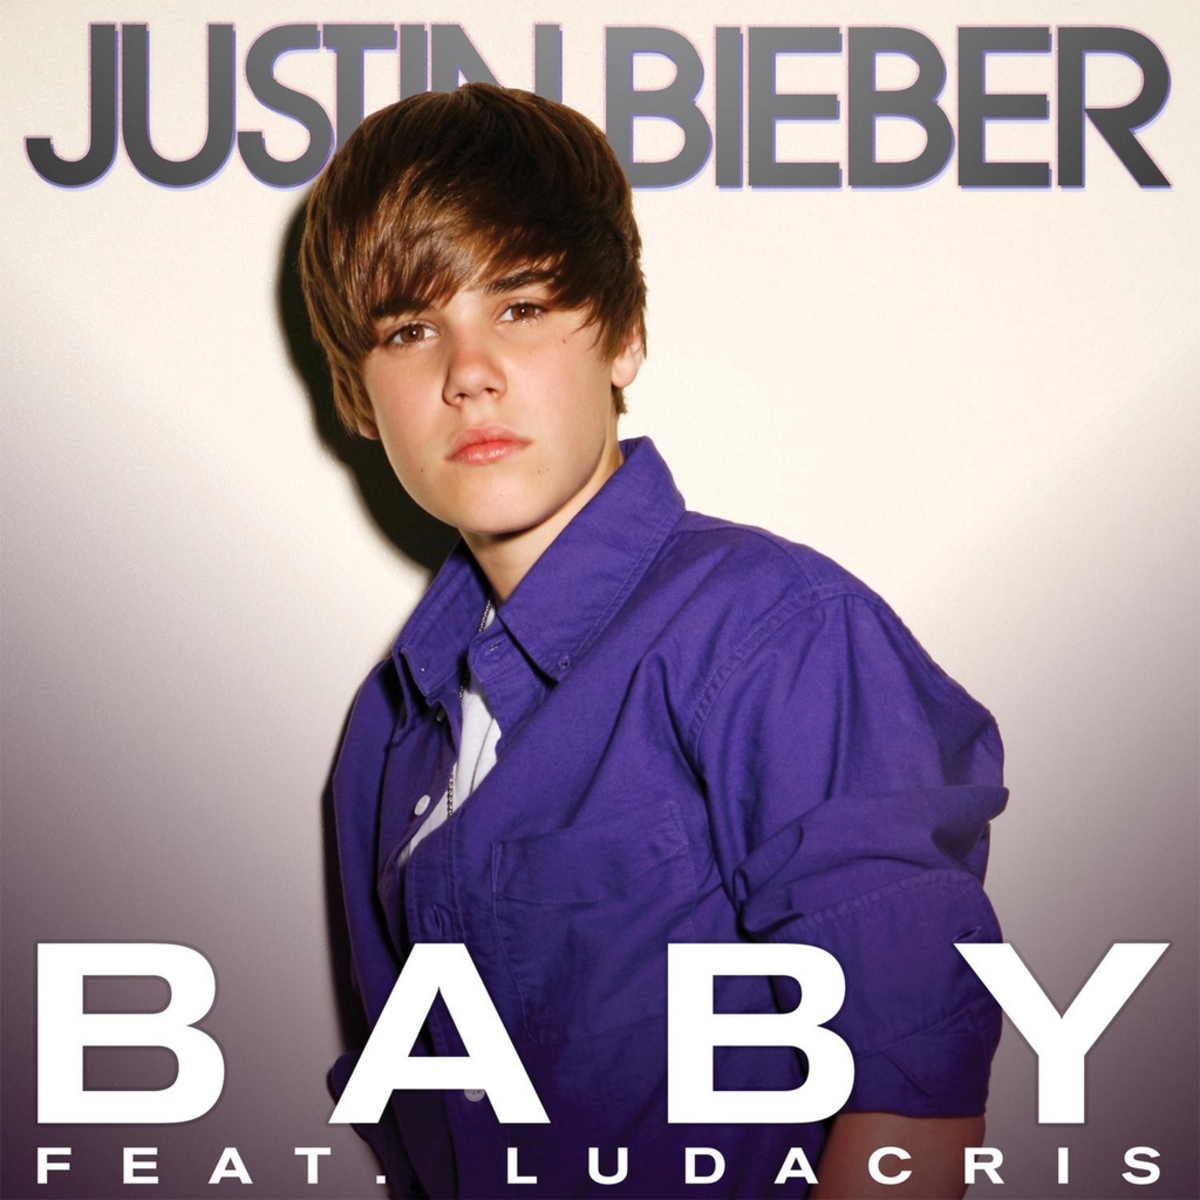 The Day Bieber Fever Was Born: Justin Bieber's "Baby" Turns 10 - E! Online